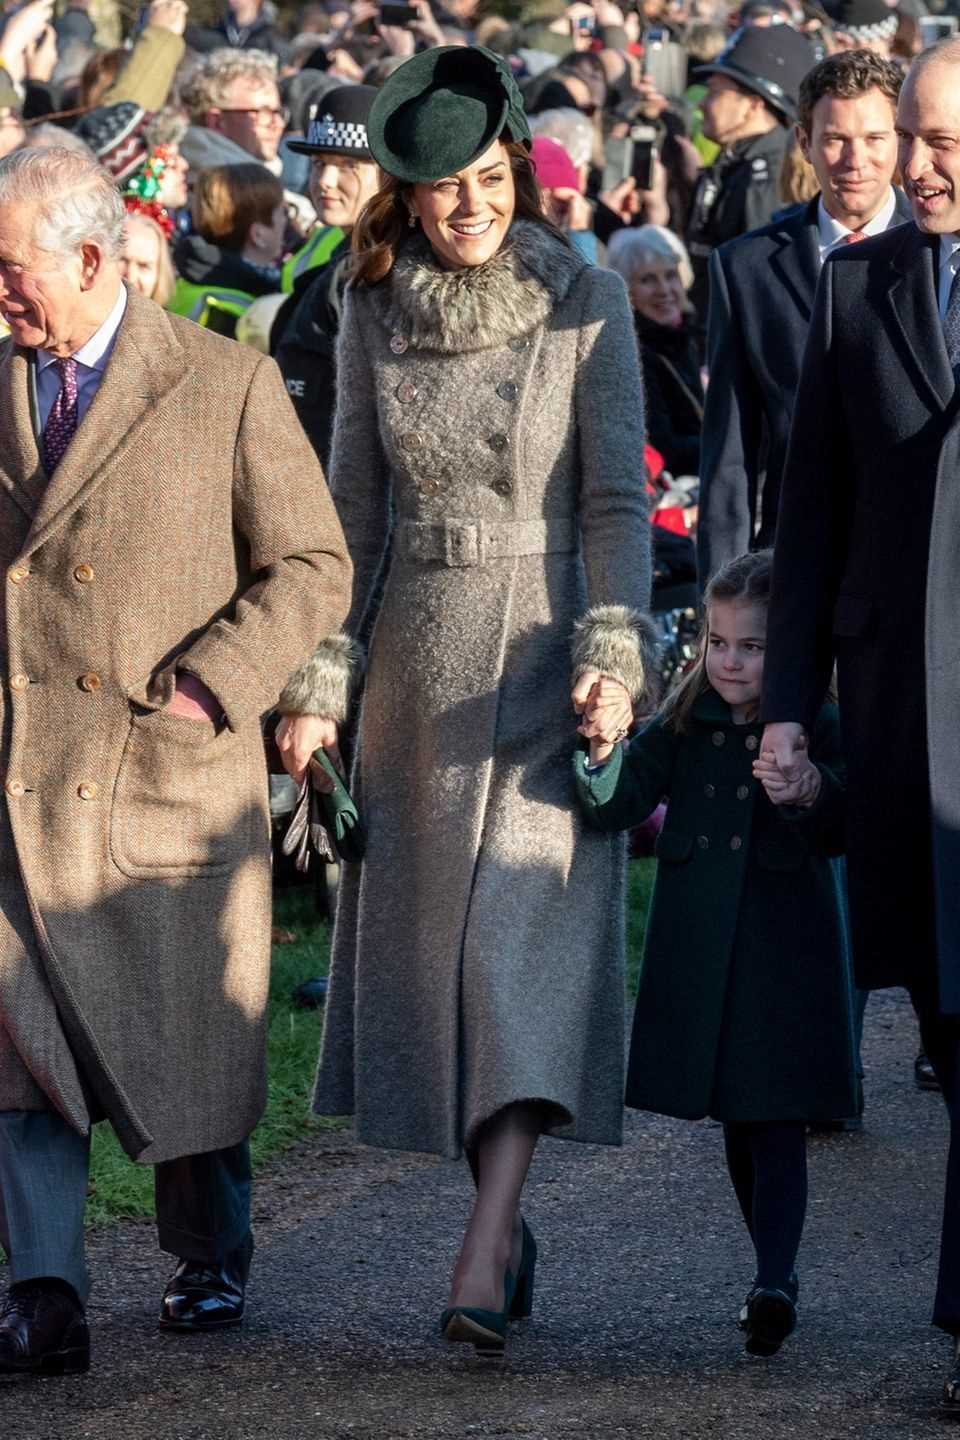 For the Christmas service in Sandringham, Duchess Kate has chosen an elegant and cozy winter look: She is wearing a coat by Catherine Walker with faux fur elements.  A waist belt emphasizes your slim silhouette.  Kate's chic suede pumps and clutch are from Emmy London and perfectly match the color of her fascinator ...